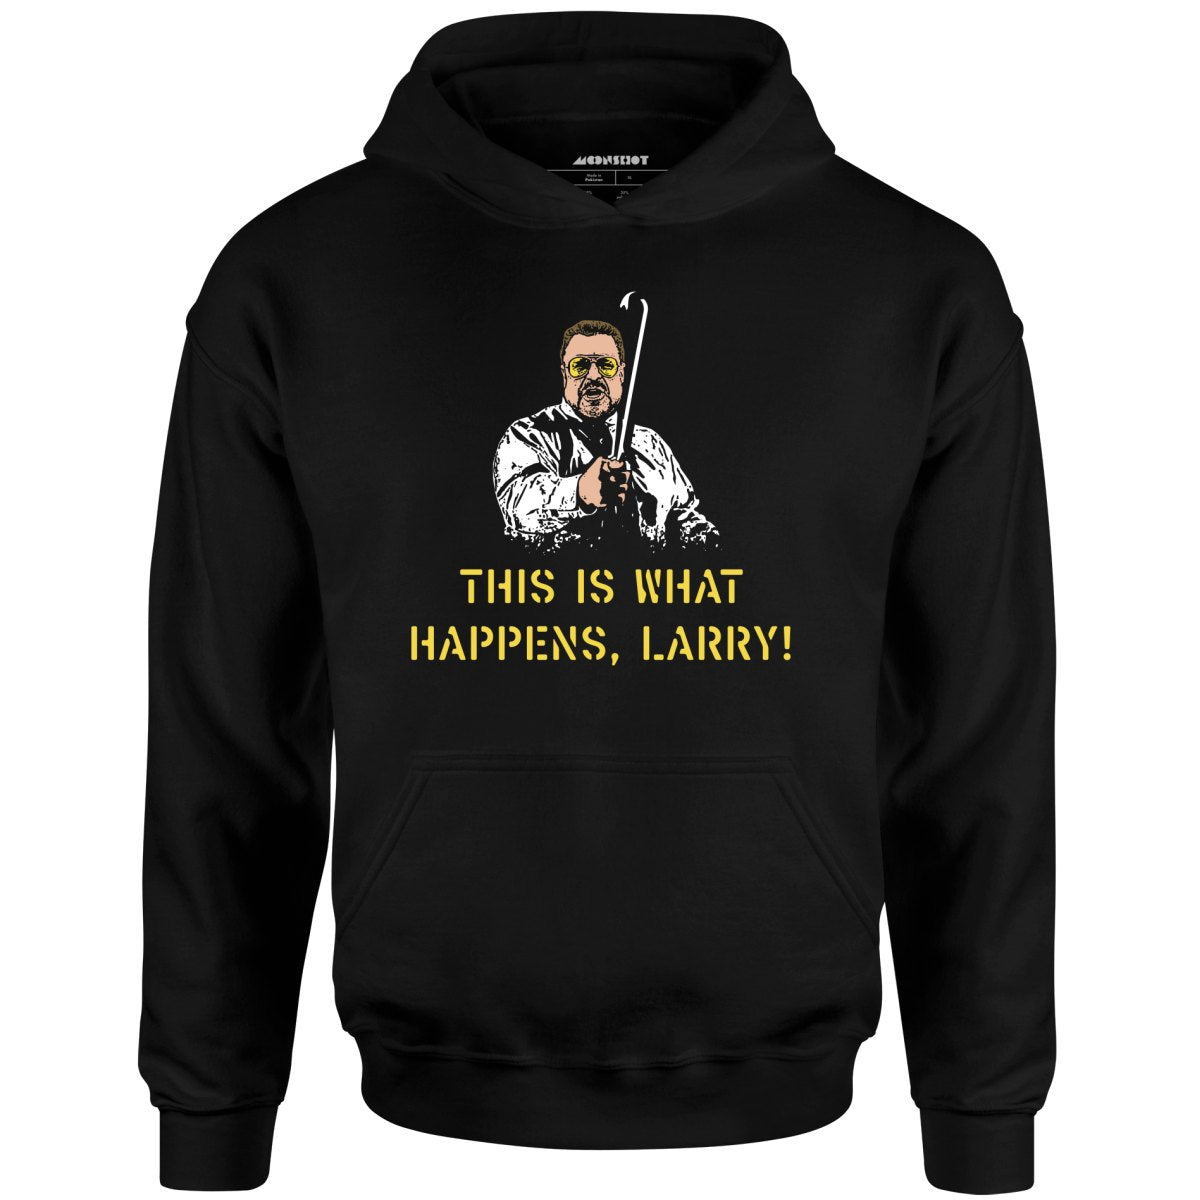 This is What Happens, Larry - Unisex Hoodie